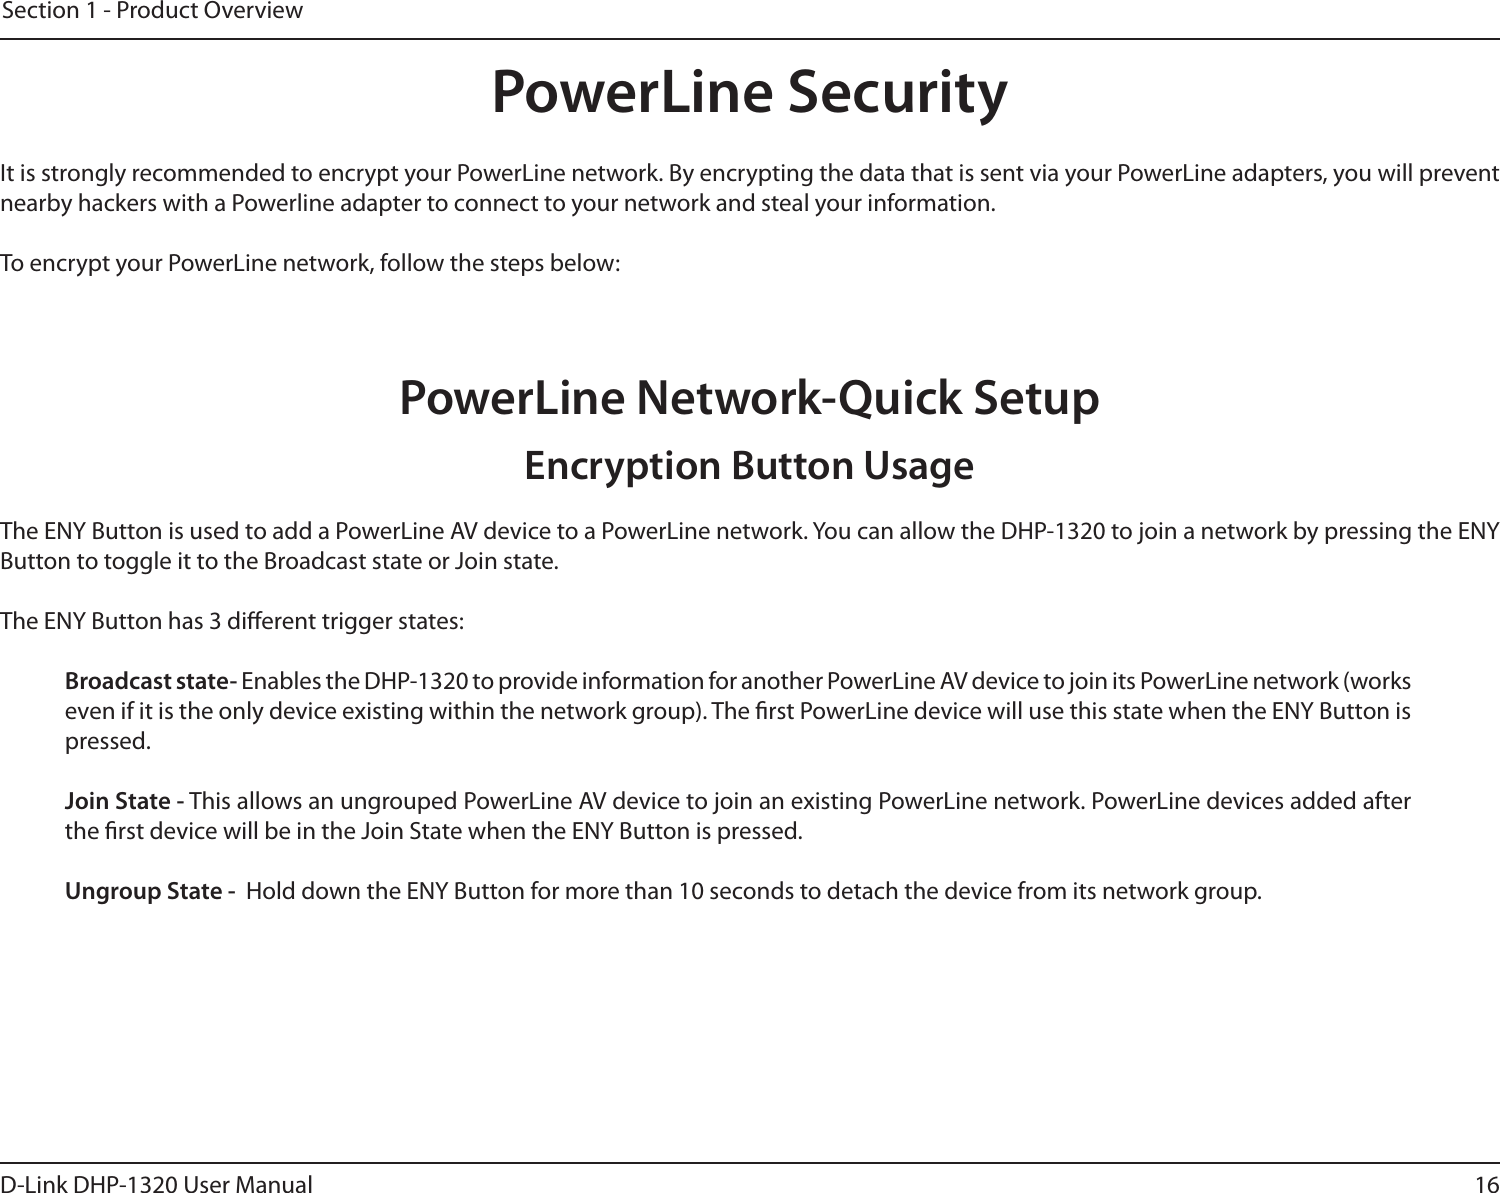 16D-Link DHP-1320 User ManualSection 1 - Product OverviewPowerLine SecurityIt is strongly recommended to encrypt your PowerLine network. By encrypting the data that is sent via your PowerLine adapters, you will prevent nearby hackers with a Powerline adapter to connect to your network and steal your information.To encrypt your PowerLine network, follow the steps below:PowerLine Network-Quick SetupThe ENY Button is used to add a PowerLine AV device to a PowerLine network. You can allow the DHP-1320 to join a network by pressing the ENY Button to toggle it to the Broadcast state or Join state.The ENY Button has 3 dierent trigger states:  Broadcast state- Enables the DHP-1320 to provide information for another PowerLine AV device to join its PowerLine network (works even if it is the only device existing within the network group). The rst PowerLine device will use this state when the ENY Button is pressed.  Join State - This allows an ungrouped PowerLine AV device to join an existing PowerLine network. PowerLine devices added after the rst device will be in the Join State when the ENY Button is pressed. Ungroup State -  Hold down the ENY Button for more than 10 seconds to detach the device from its network group. Encryption Button Usage